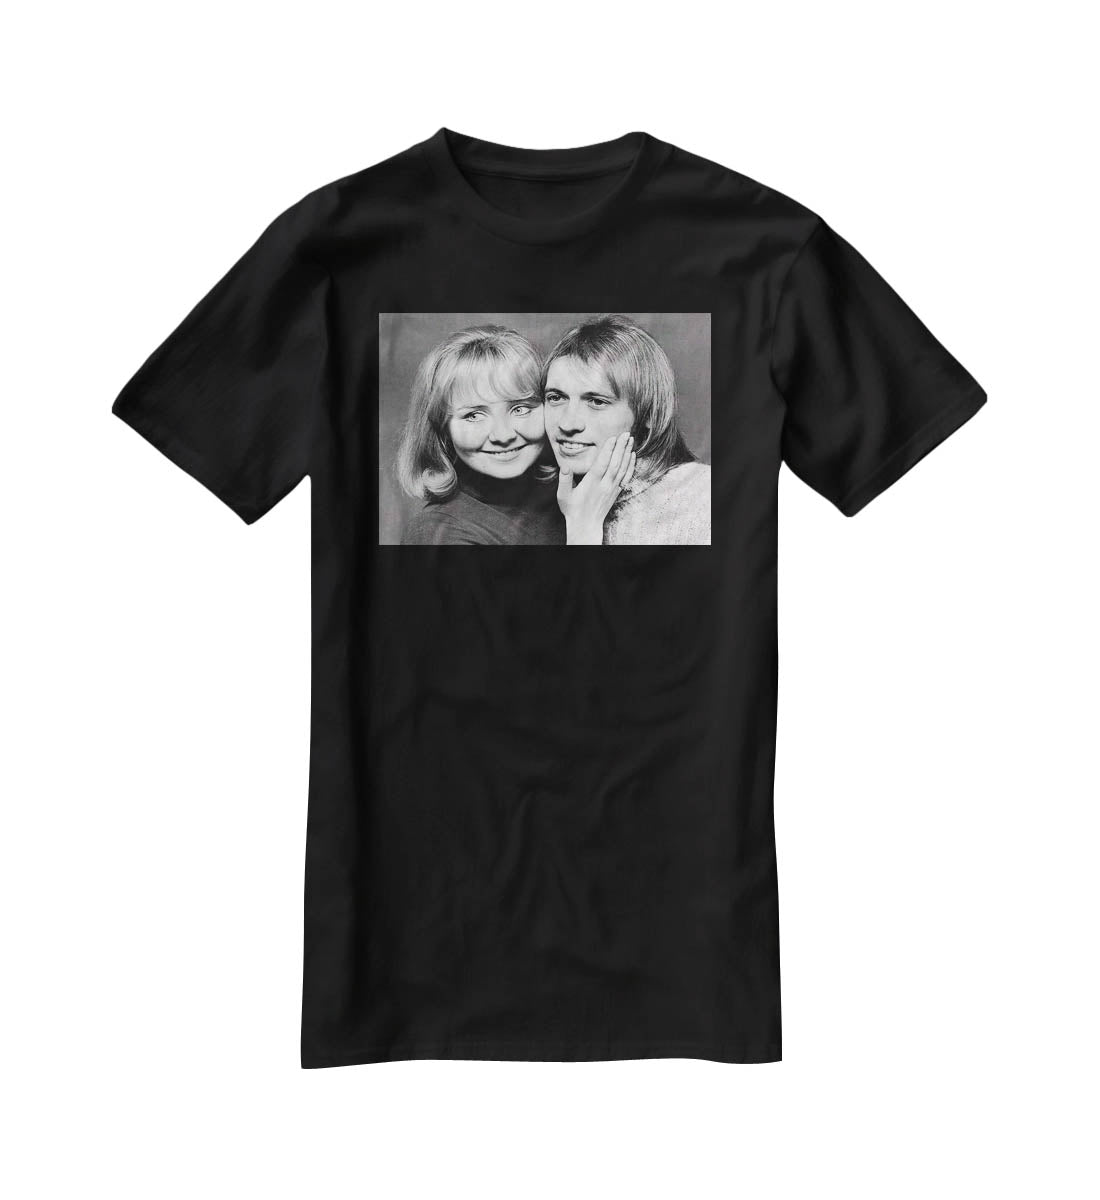 Lulu with Maurice Gibb of the Bee Gees T-Shirt - Canvas Art Rocks - 1